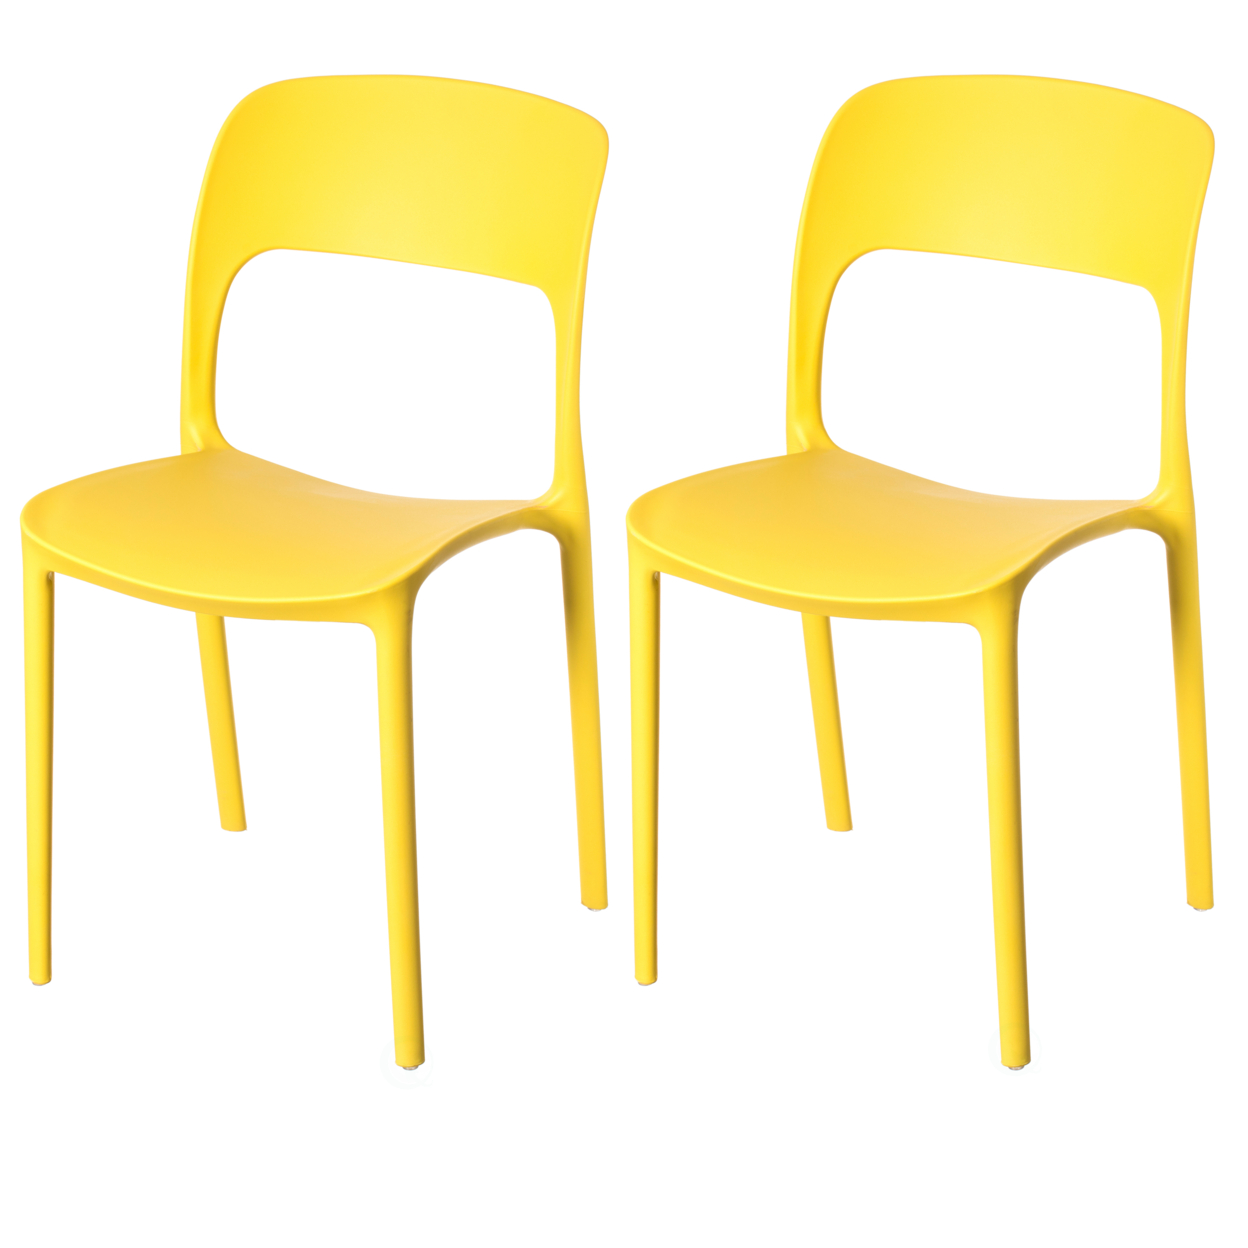 Modern Plastic Outdoor Dining Chair With Open Curved Back - Set Of 2 Yellow